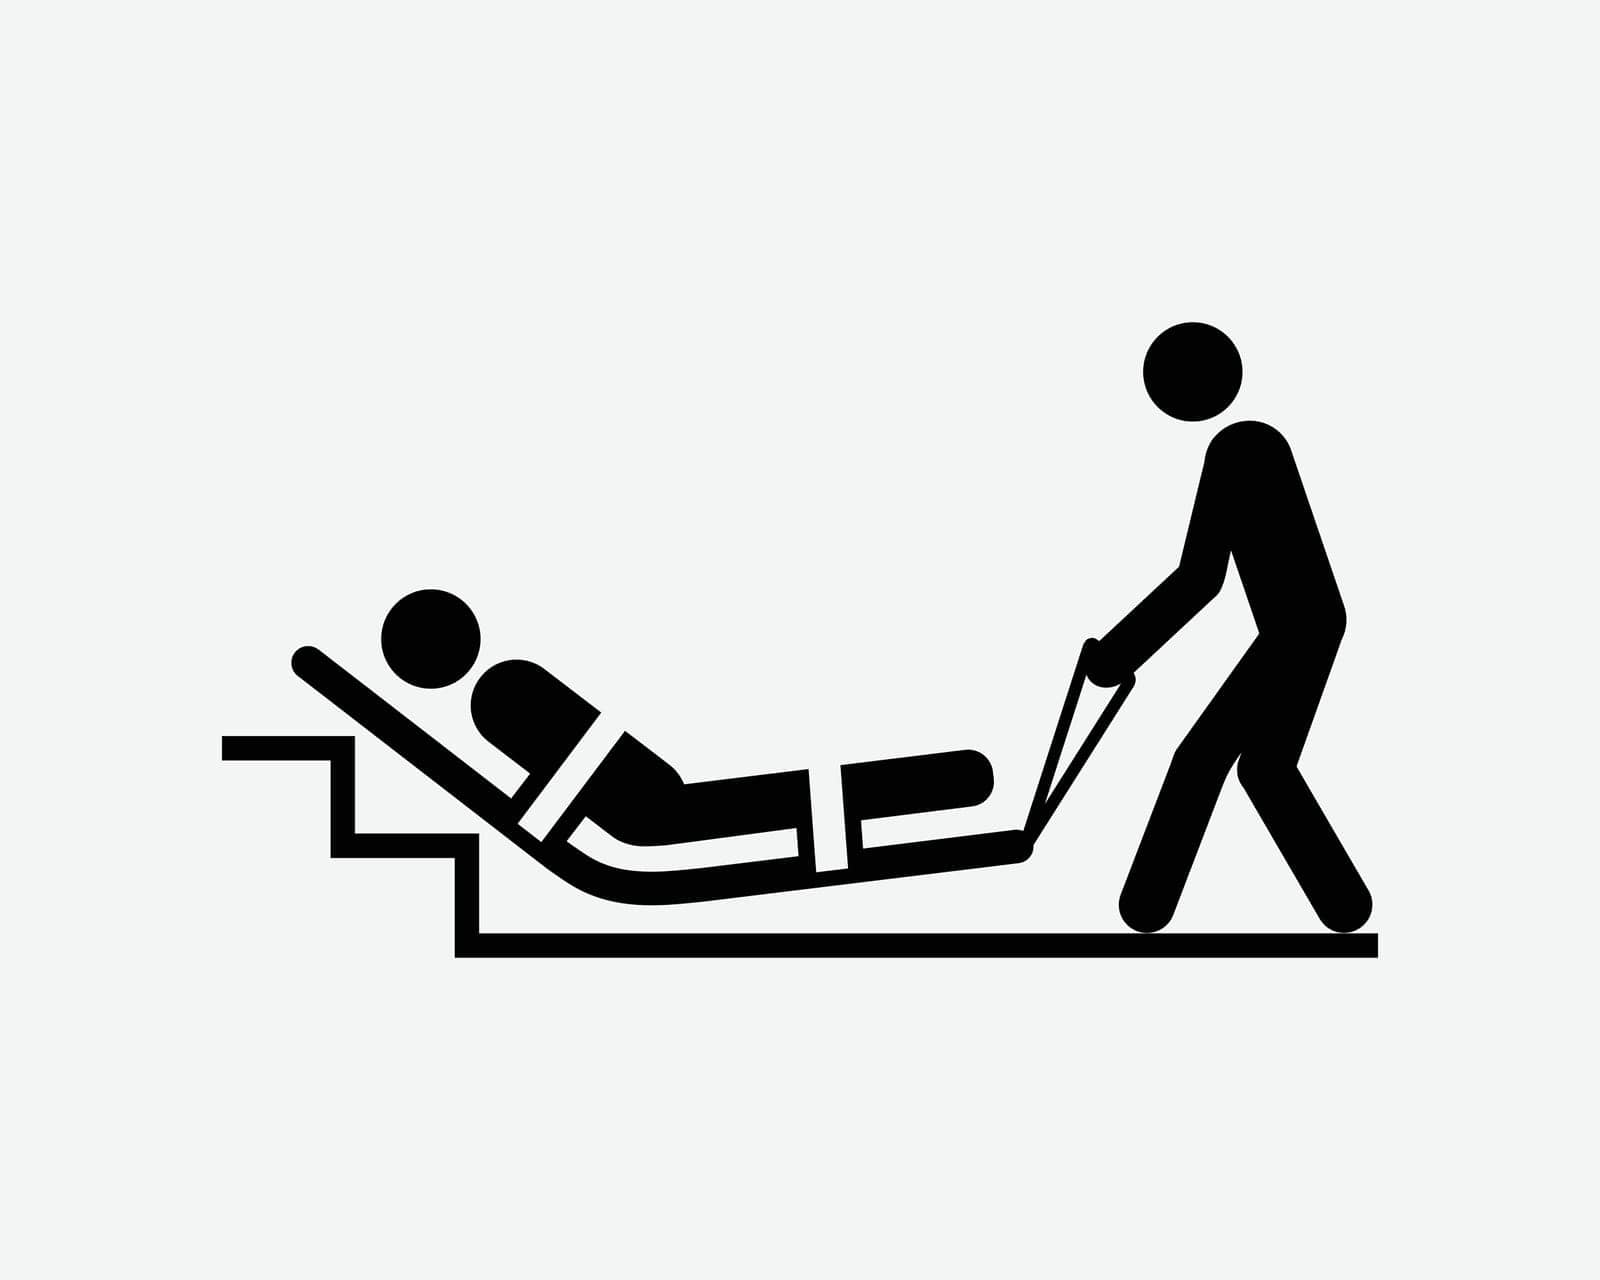 Emergency Evacuation Mattress Bed Rescue Injured Fire Black White Silhouette Sign Symbol Icon Clipart Graphic Artwork Pictogram Illustration Vector